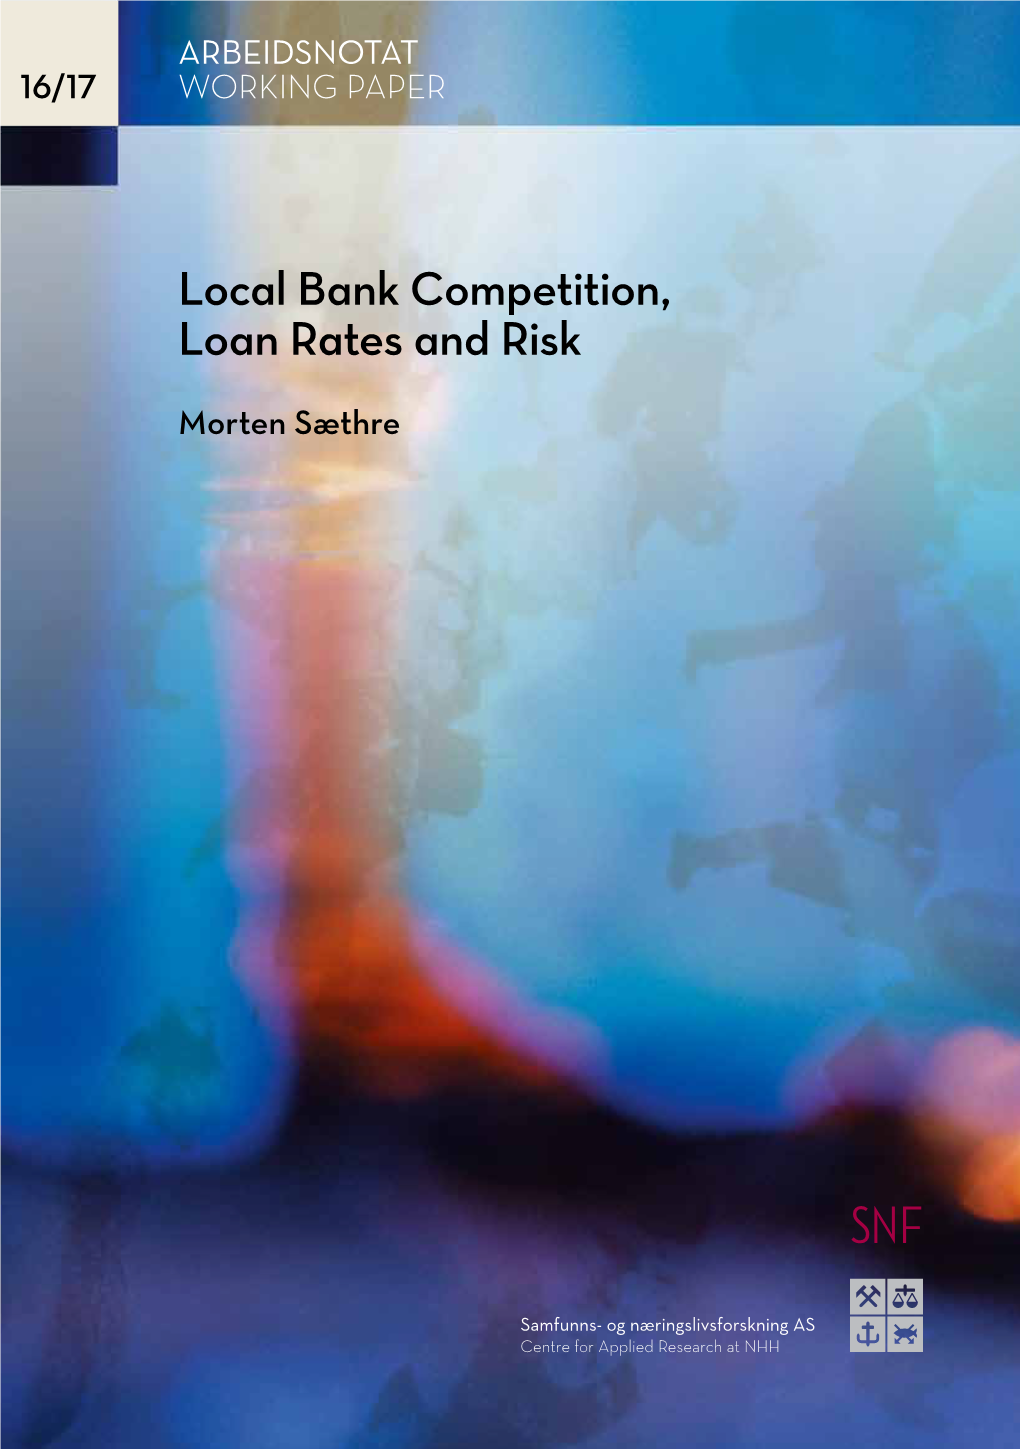 Local Bank Competition, Loan Rates and Risk